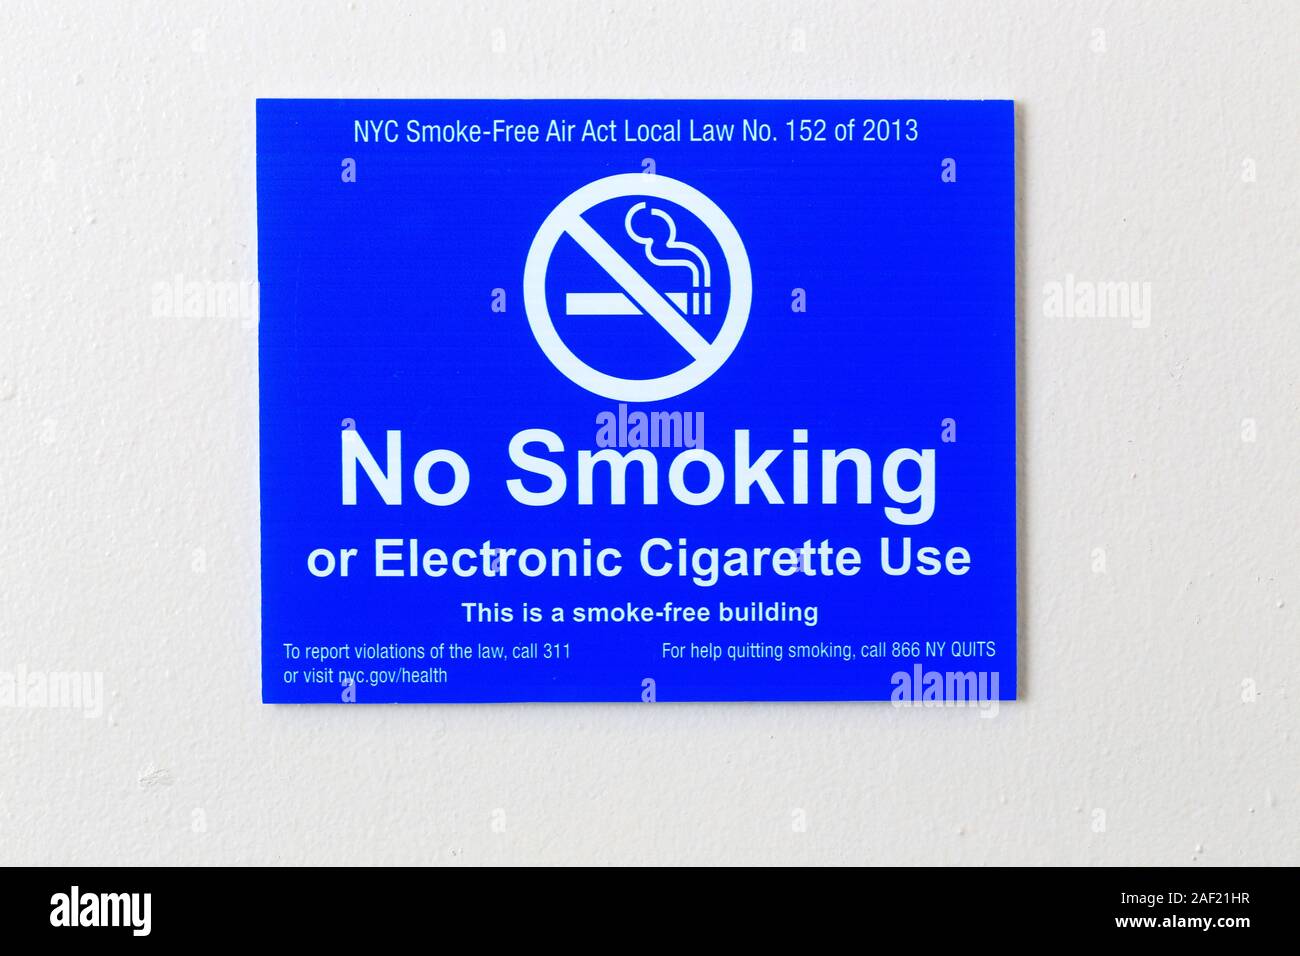 A No Smoking, No Electronic Cigarette Usage sign on a white painted wall inside a NYC building. Stock Photo